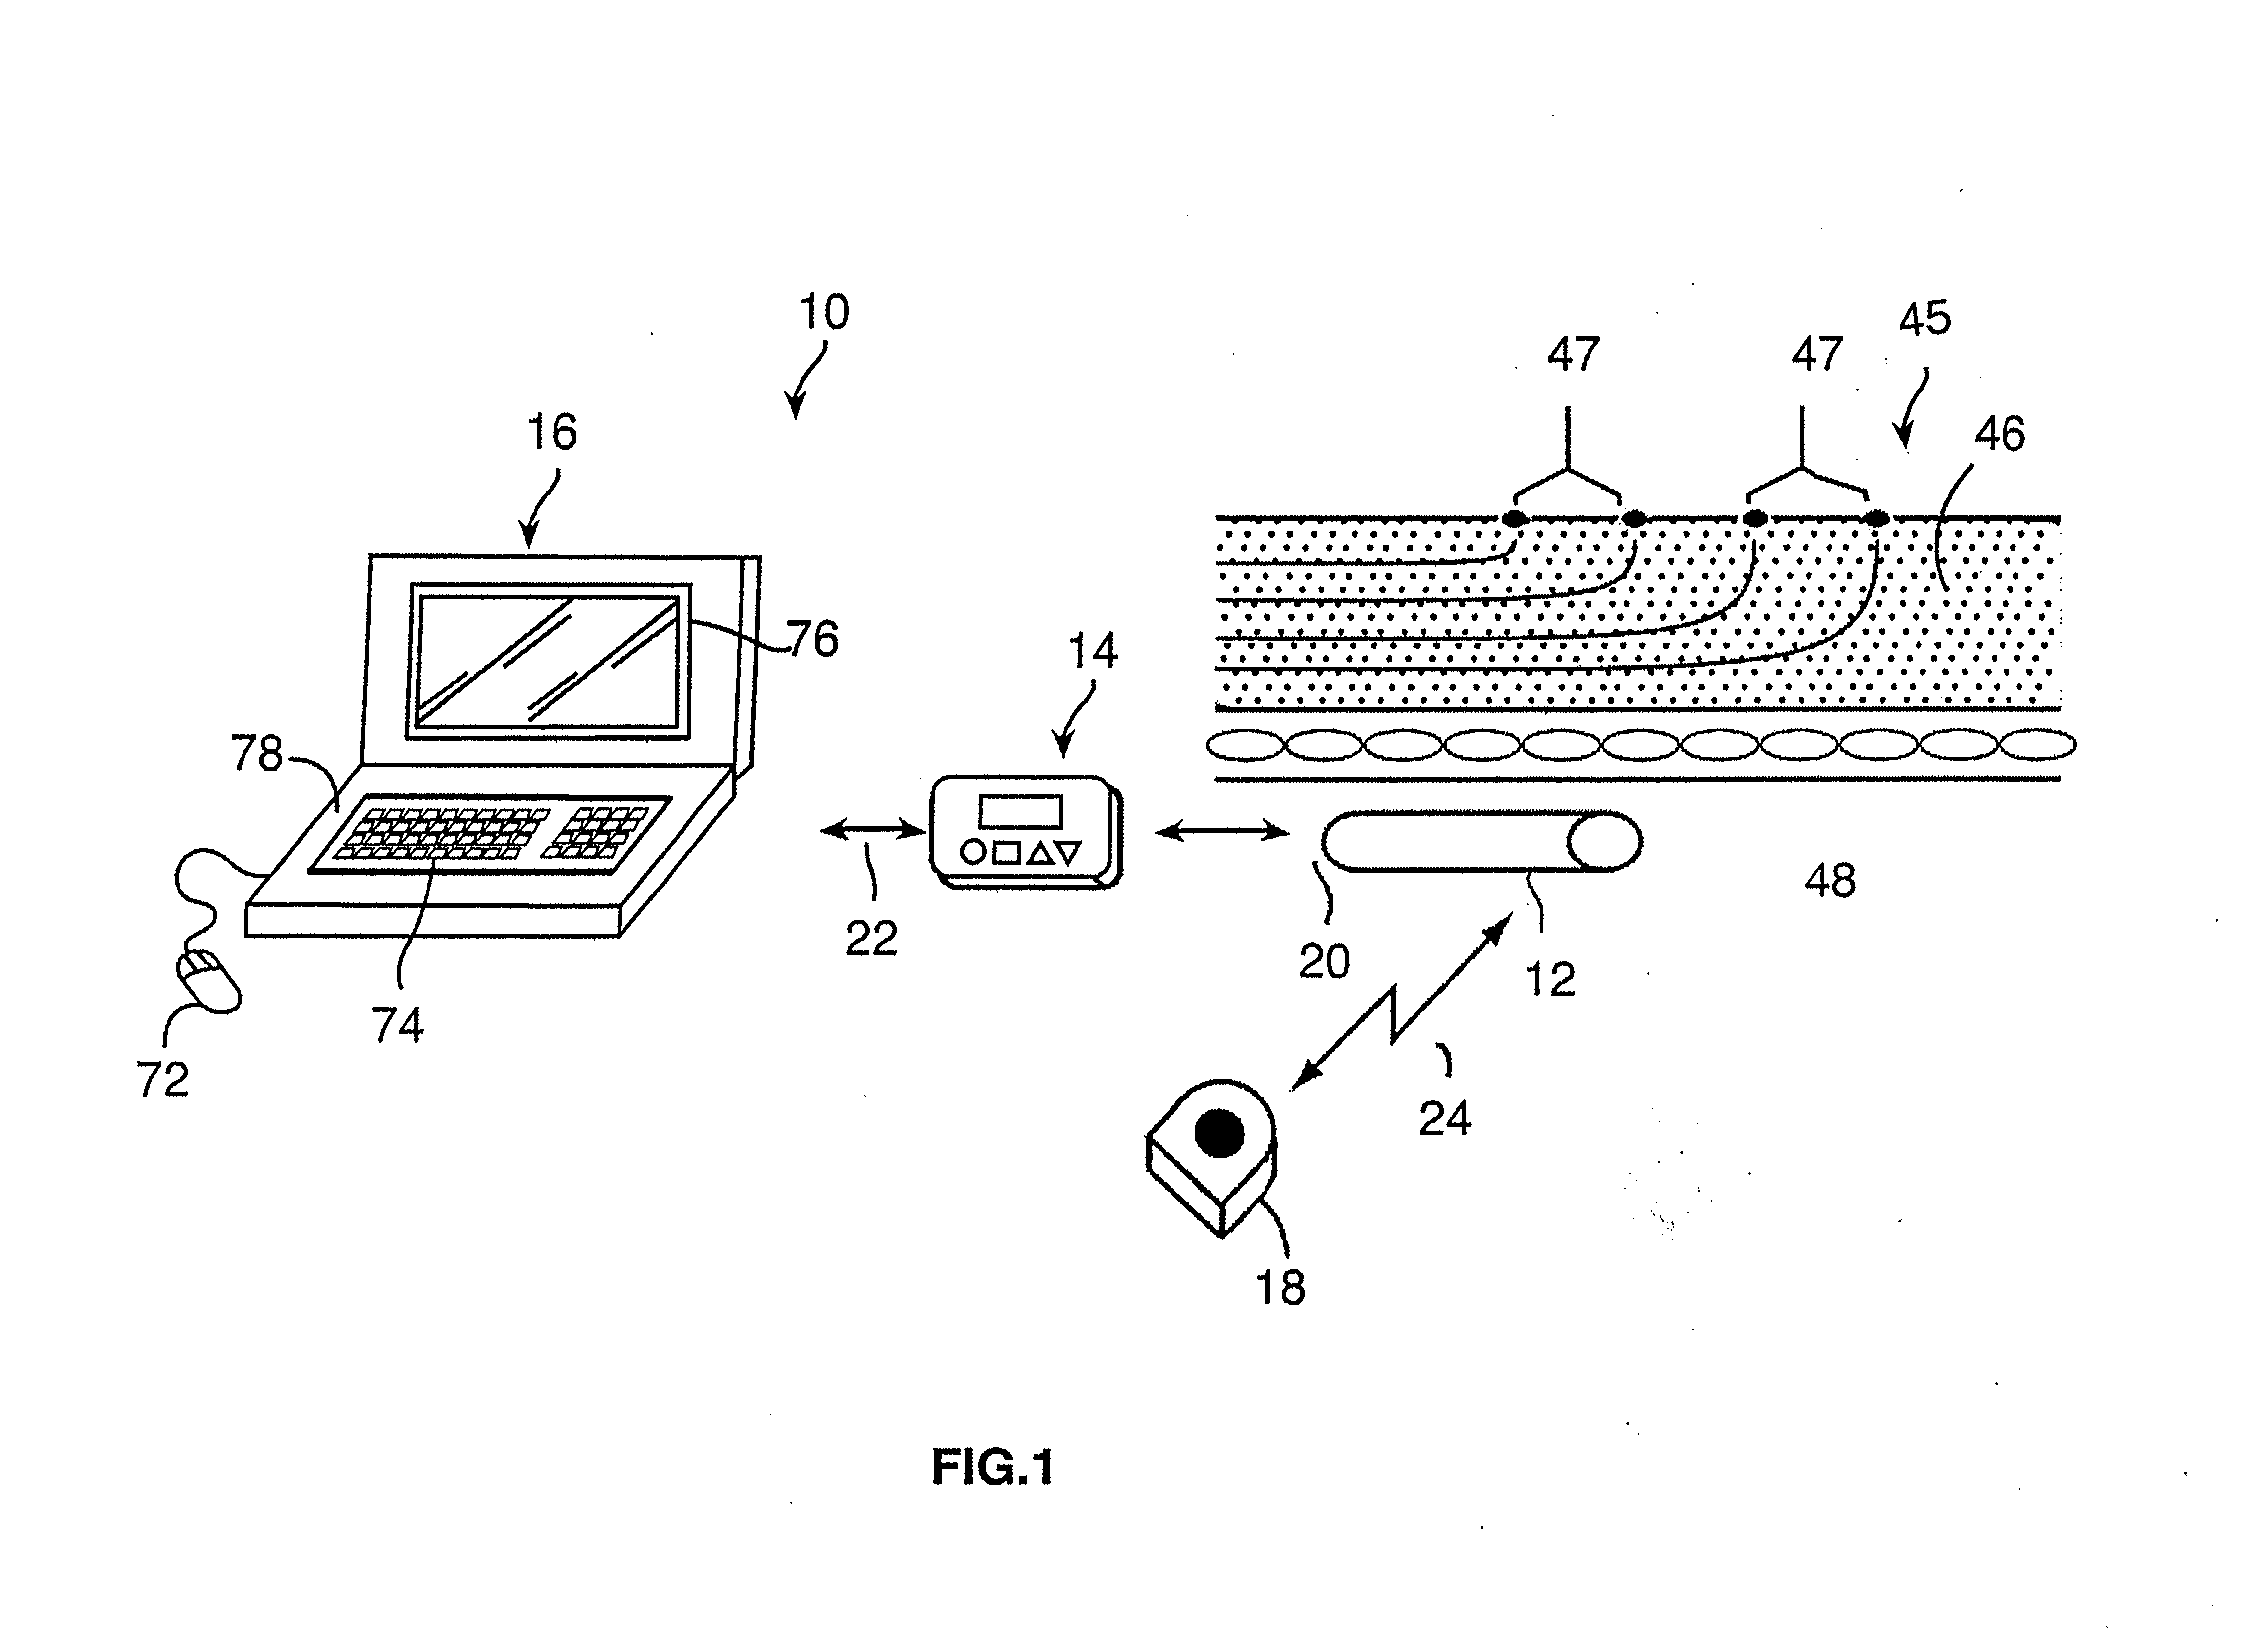 Method for selectively performing local and radial peripheral stimulation